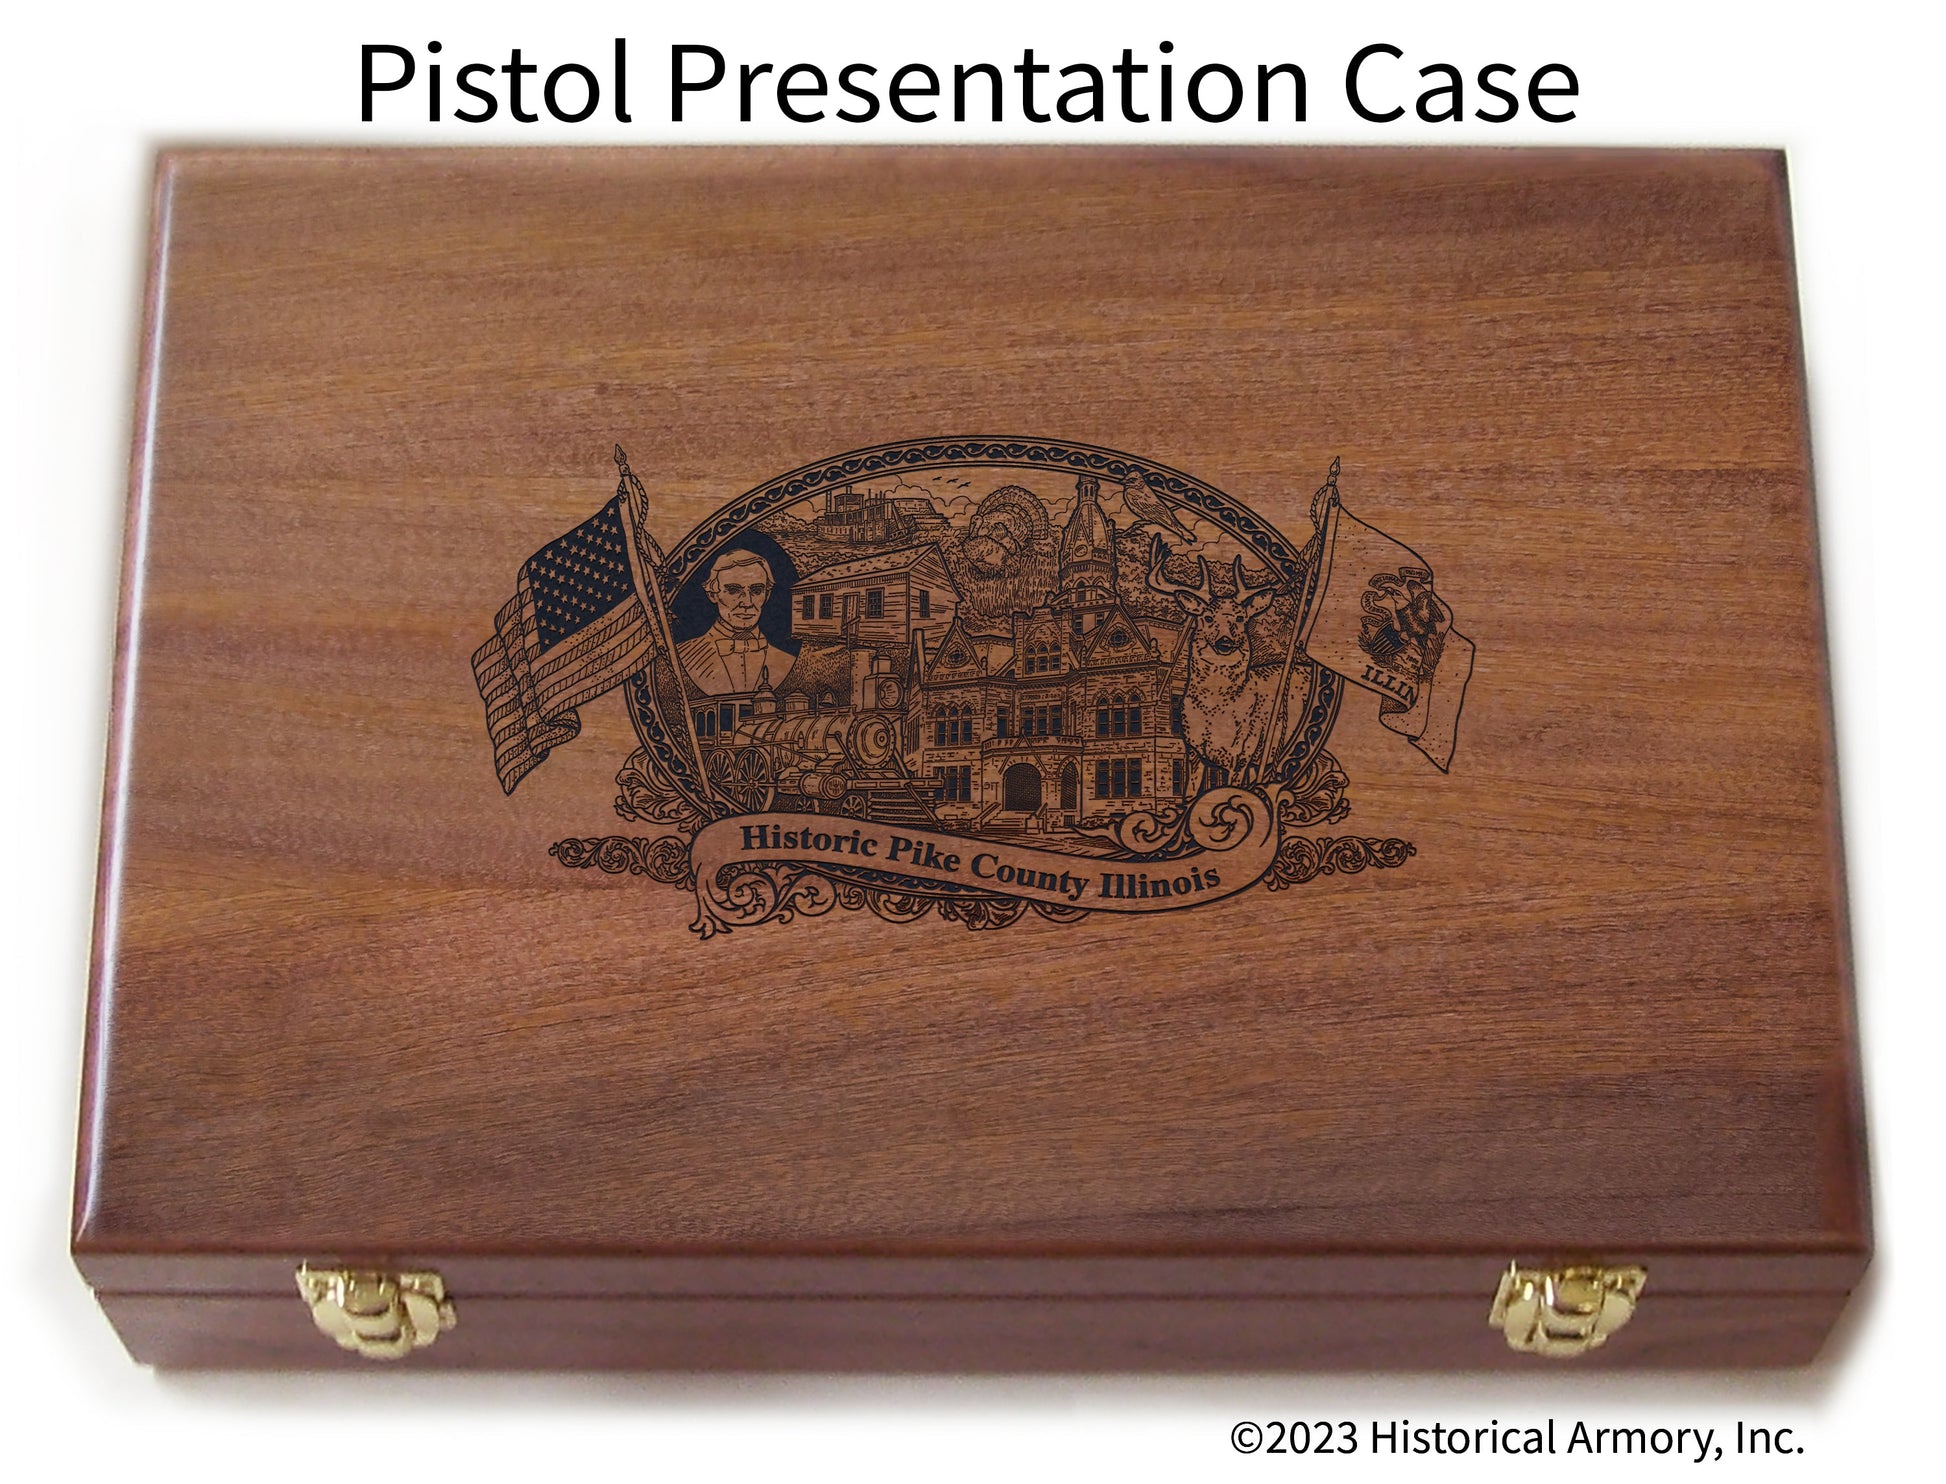 Pike County Illinois Engraved .45 Auto Ruger 1911 Presentation Case